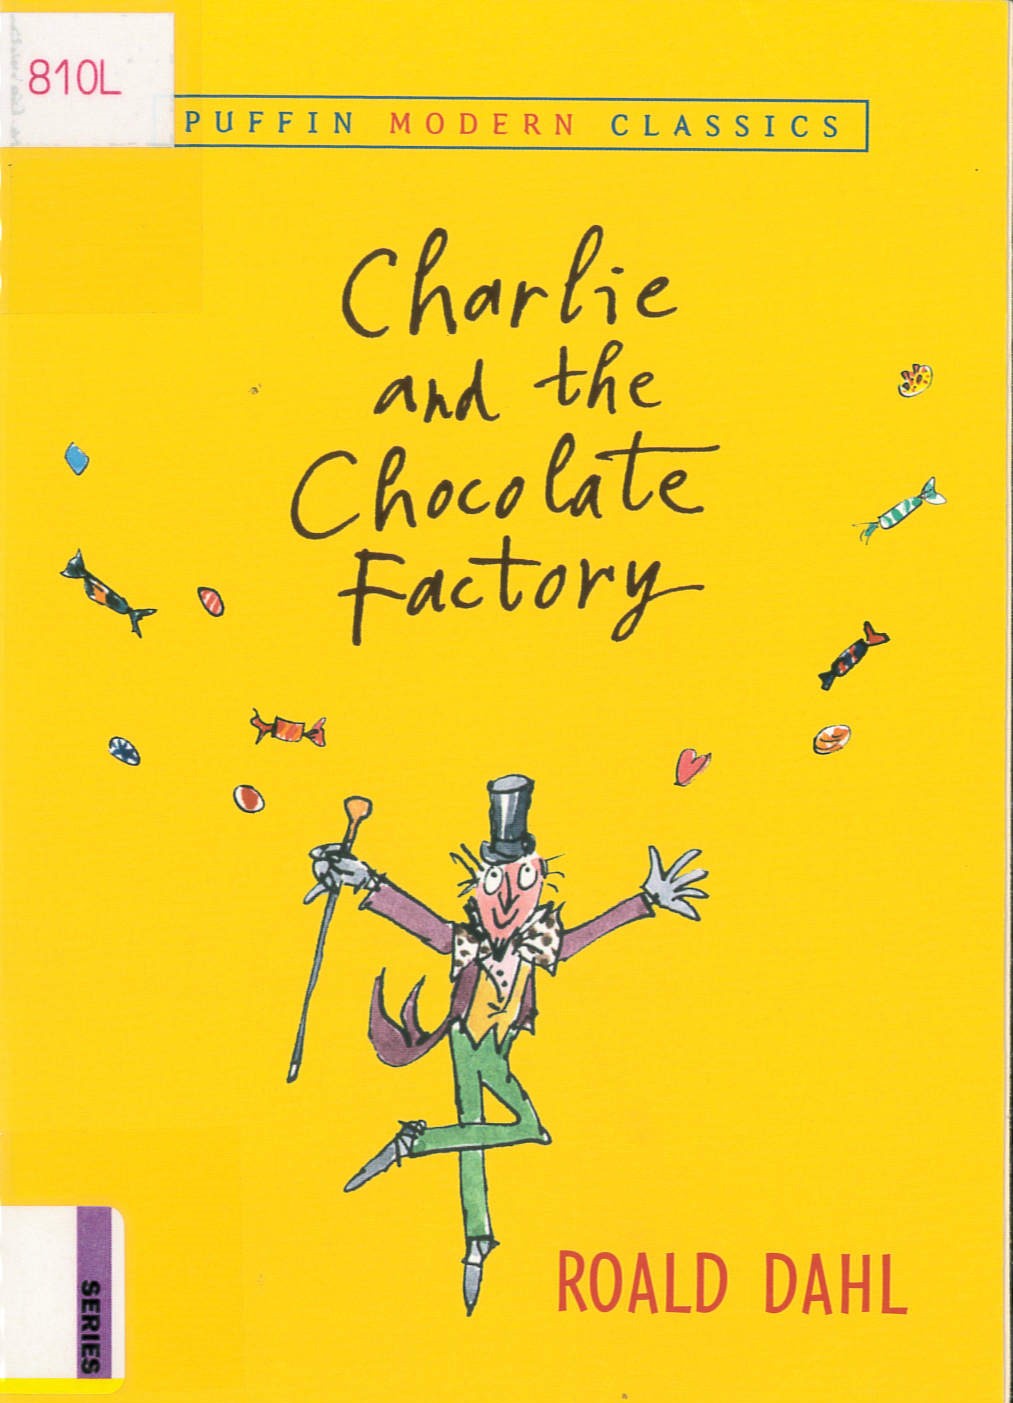 Charlie and the chocolate factory /